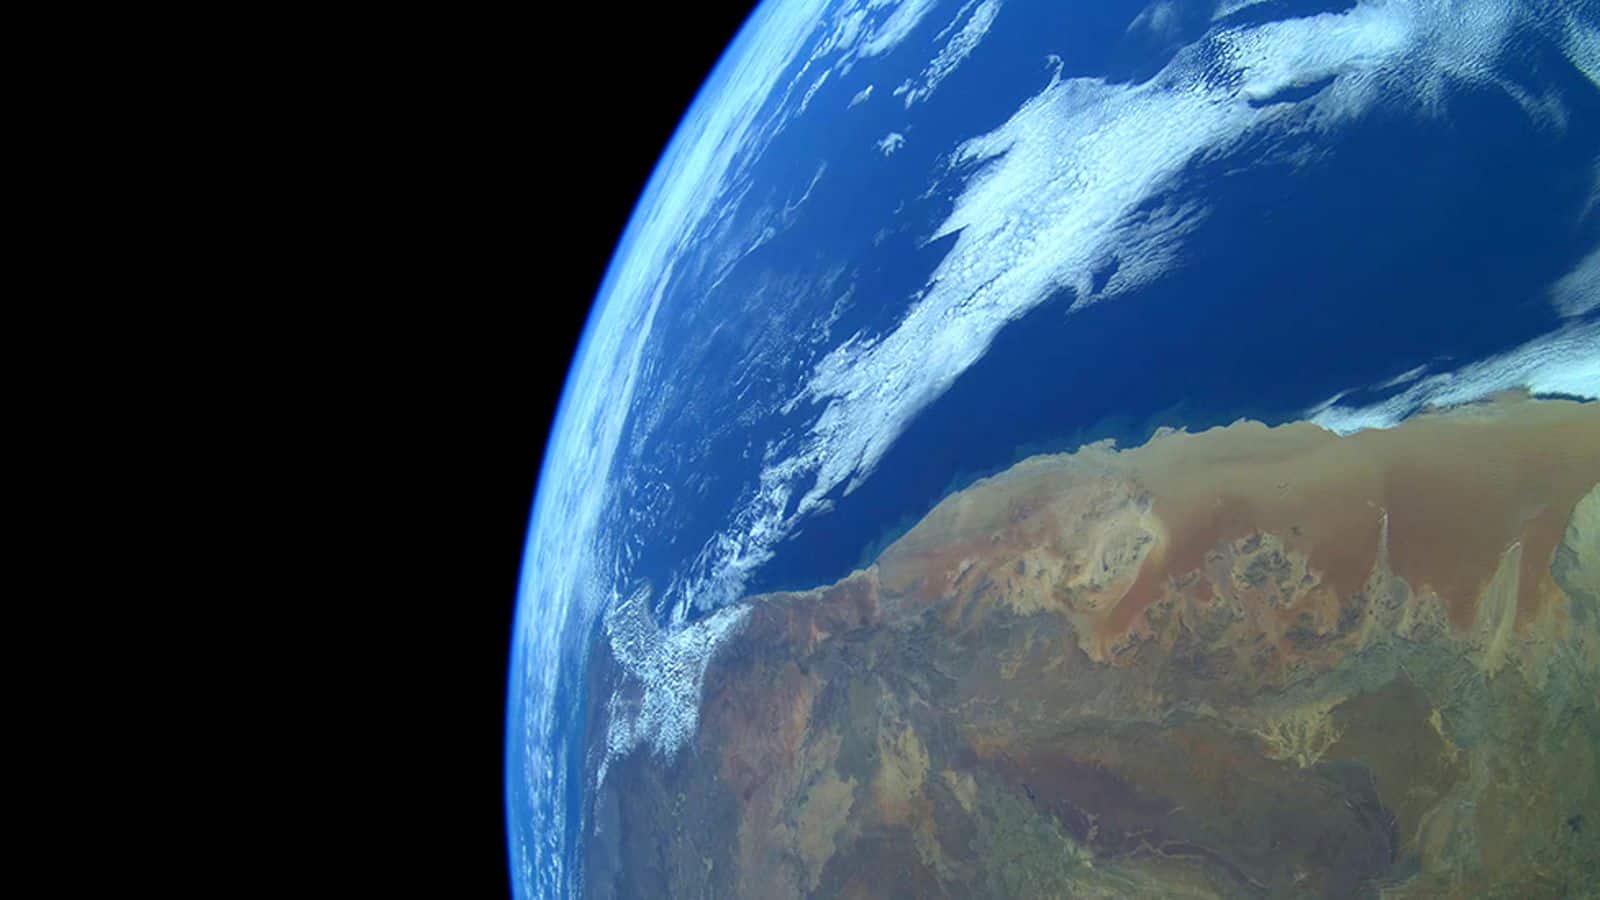 UK start-up to stream 4K views of Earth from ISS